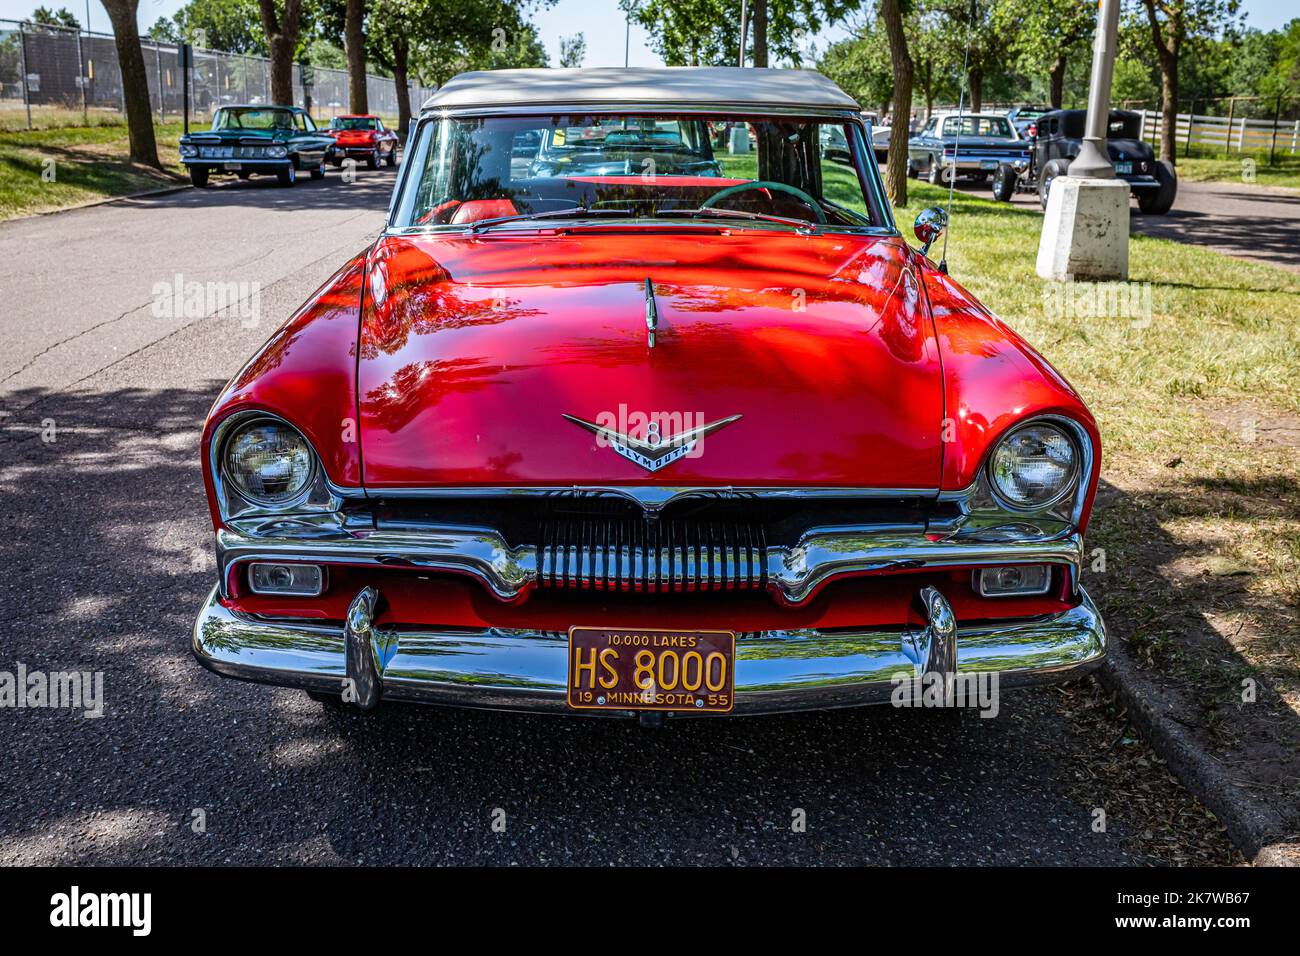 Falcon Heights, MN - June 19, 2022: High perspective front view of a 1955 Plymouth Belvedere Convertible at a local car show. Stock Photo